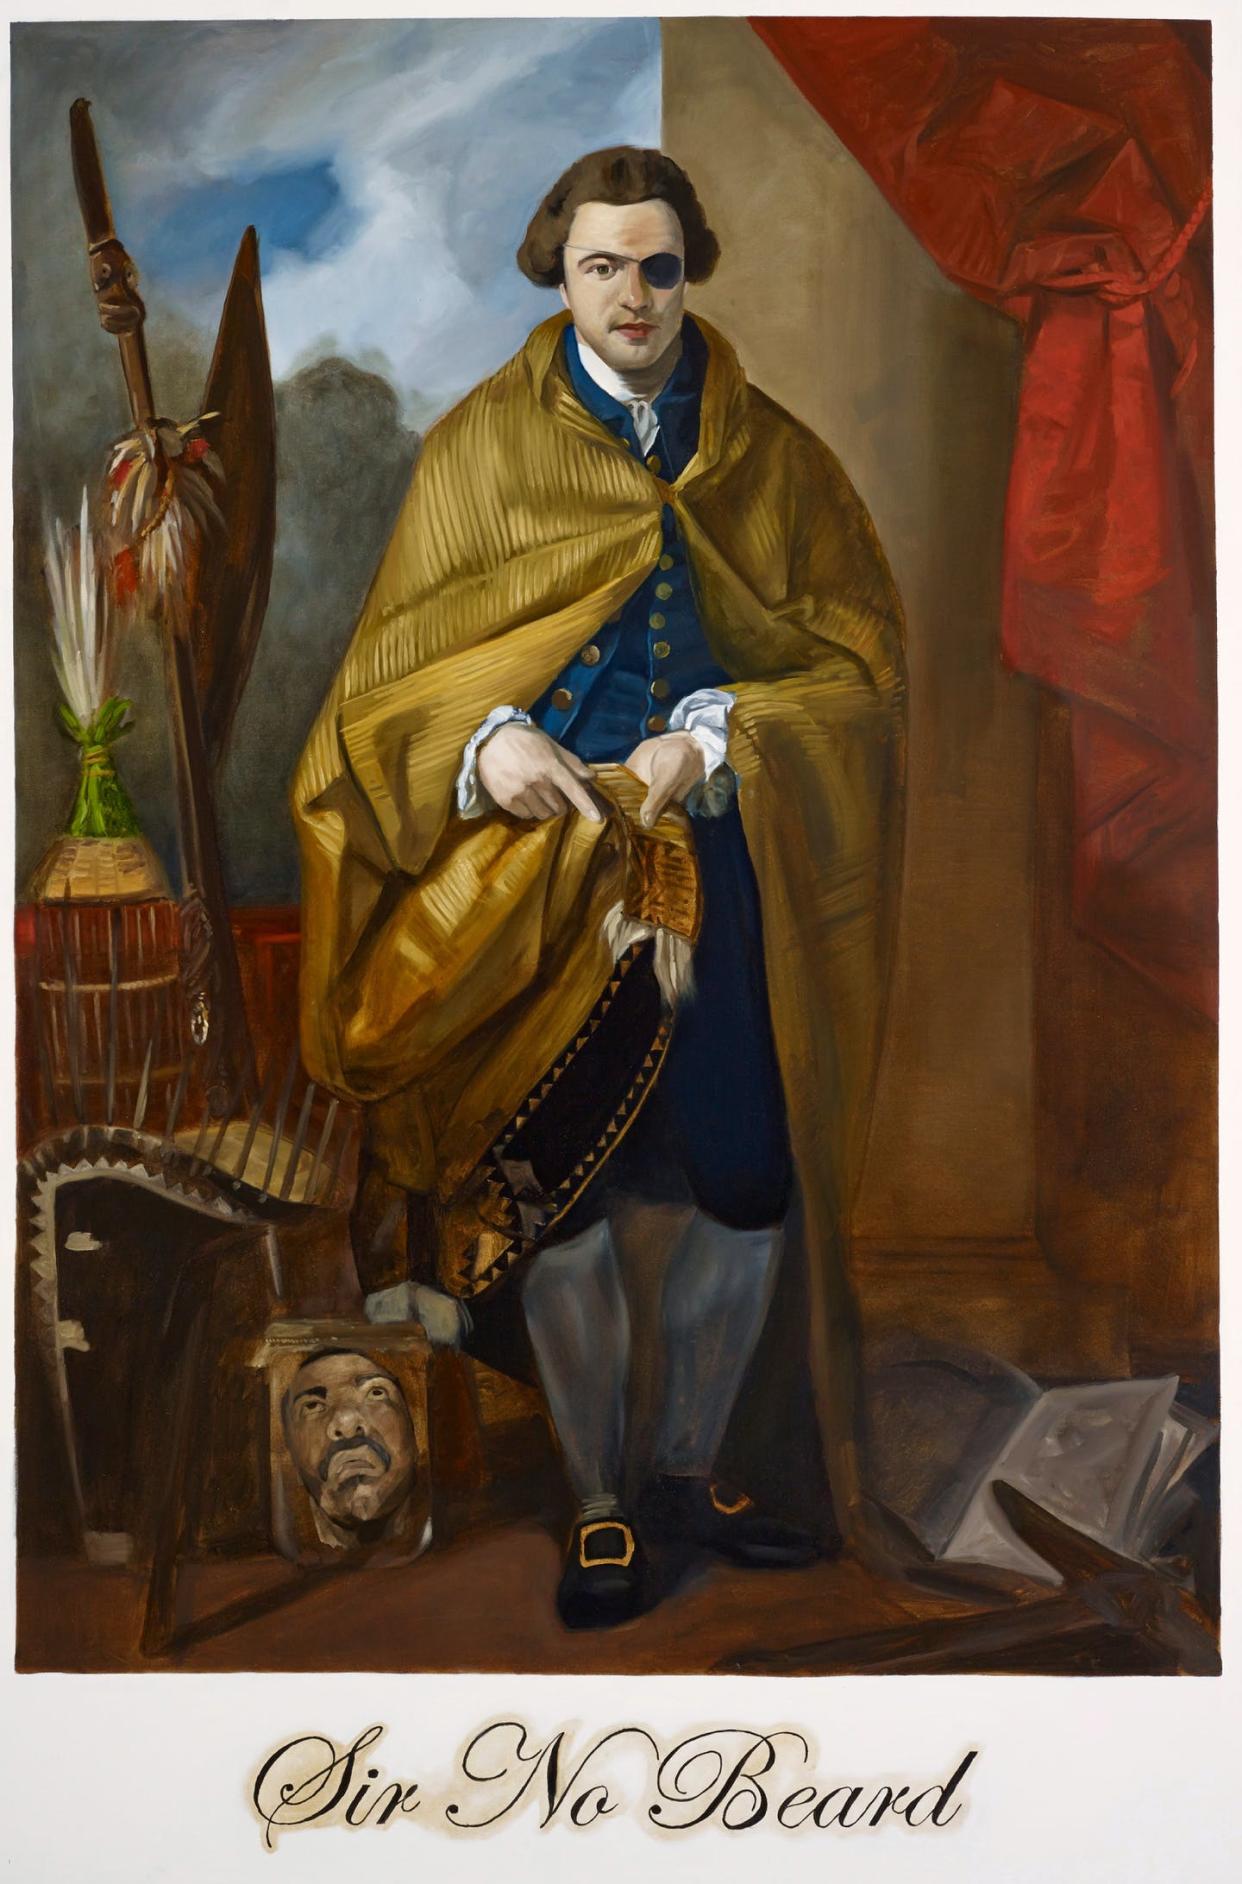 <span class="caption">Daniel Boyd, Sir No Beard, 2007. Oil on canvas 183.5 x 121.5 cm. Art Gallery of New South Wales, Sydney, gift of Clinton Ng 2012, donated through the Australian Government’s Cultural Gifts Program 378.2012. </span> <span class="attribution"><span class="source">Image: AGNSW, Felicity Jenkins © Daniel Boyd</span></span>